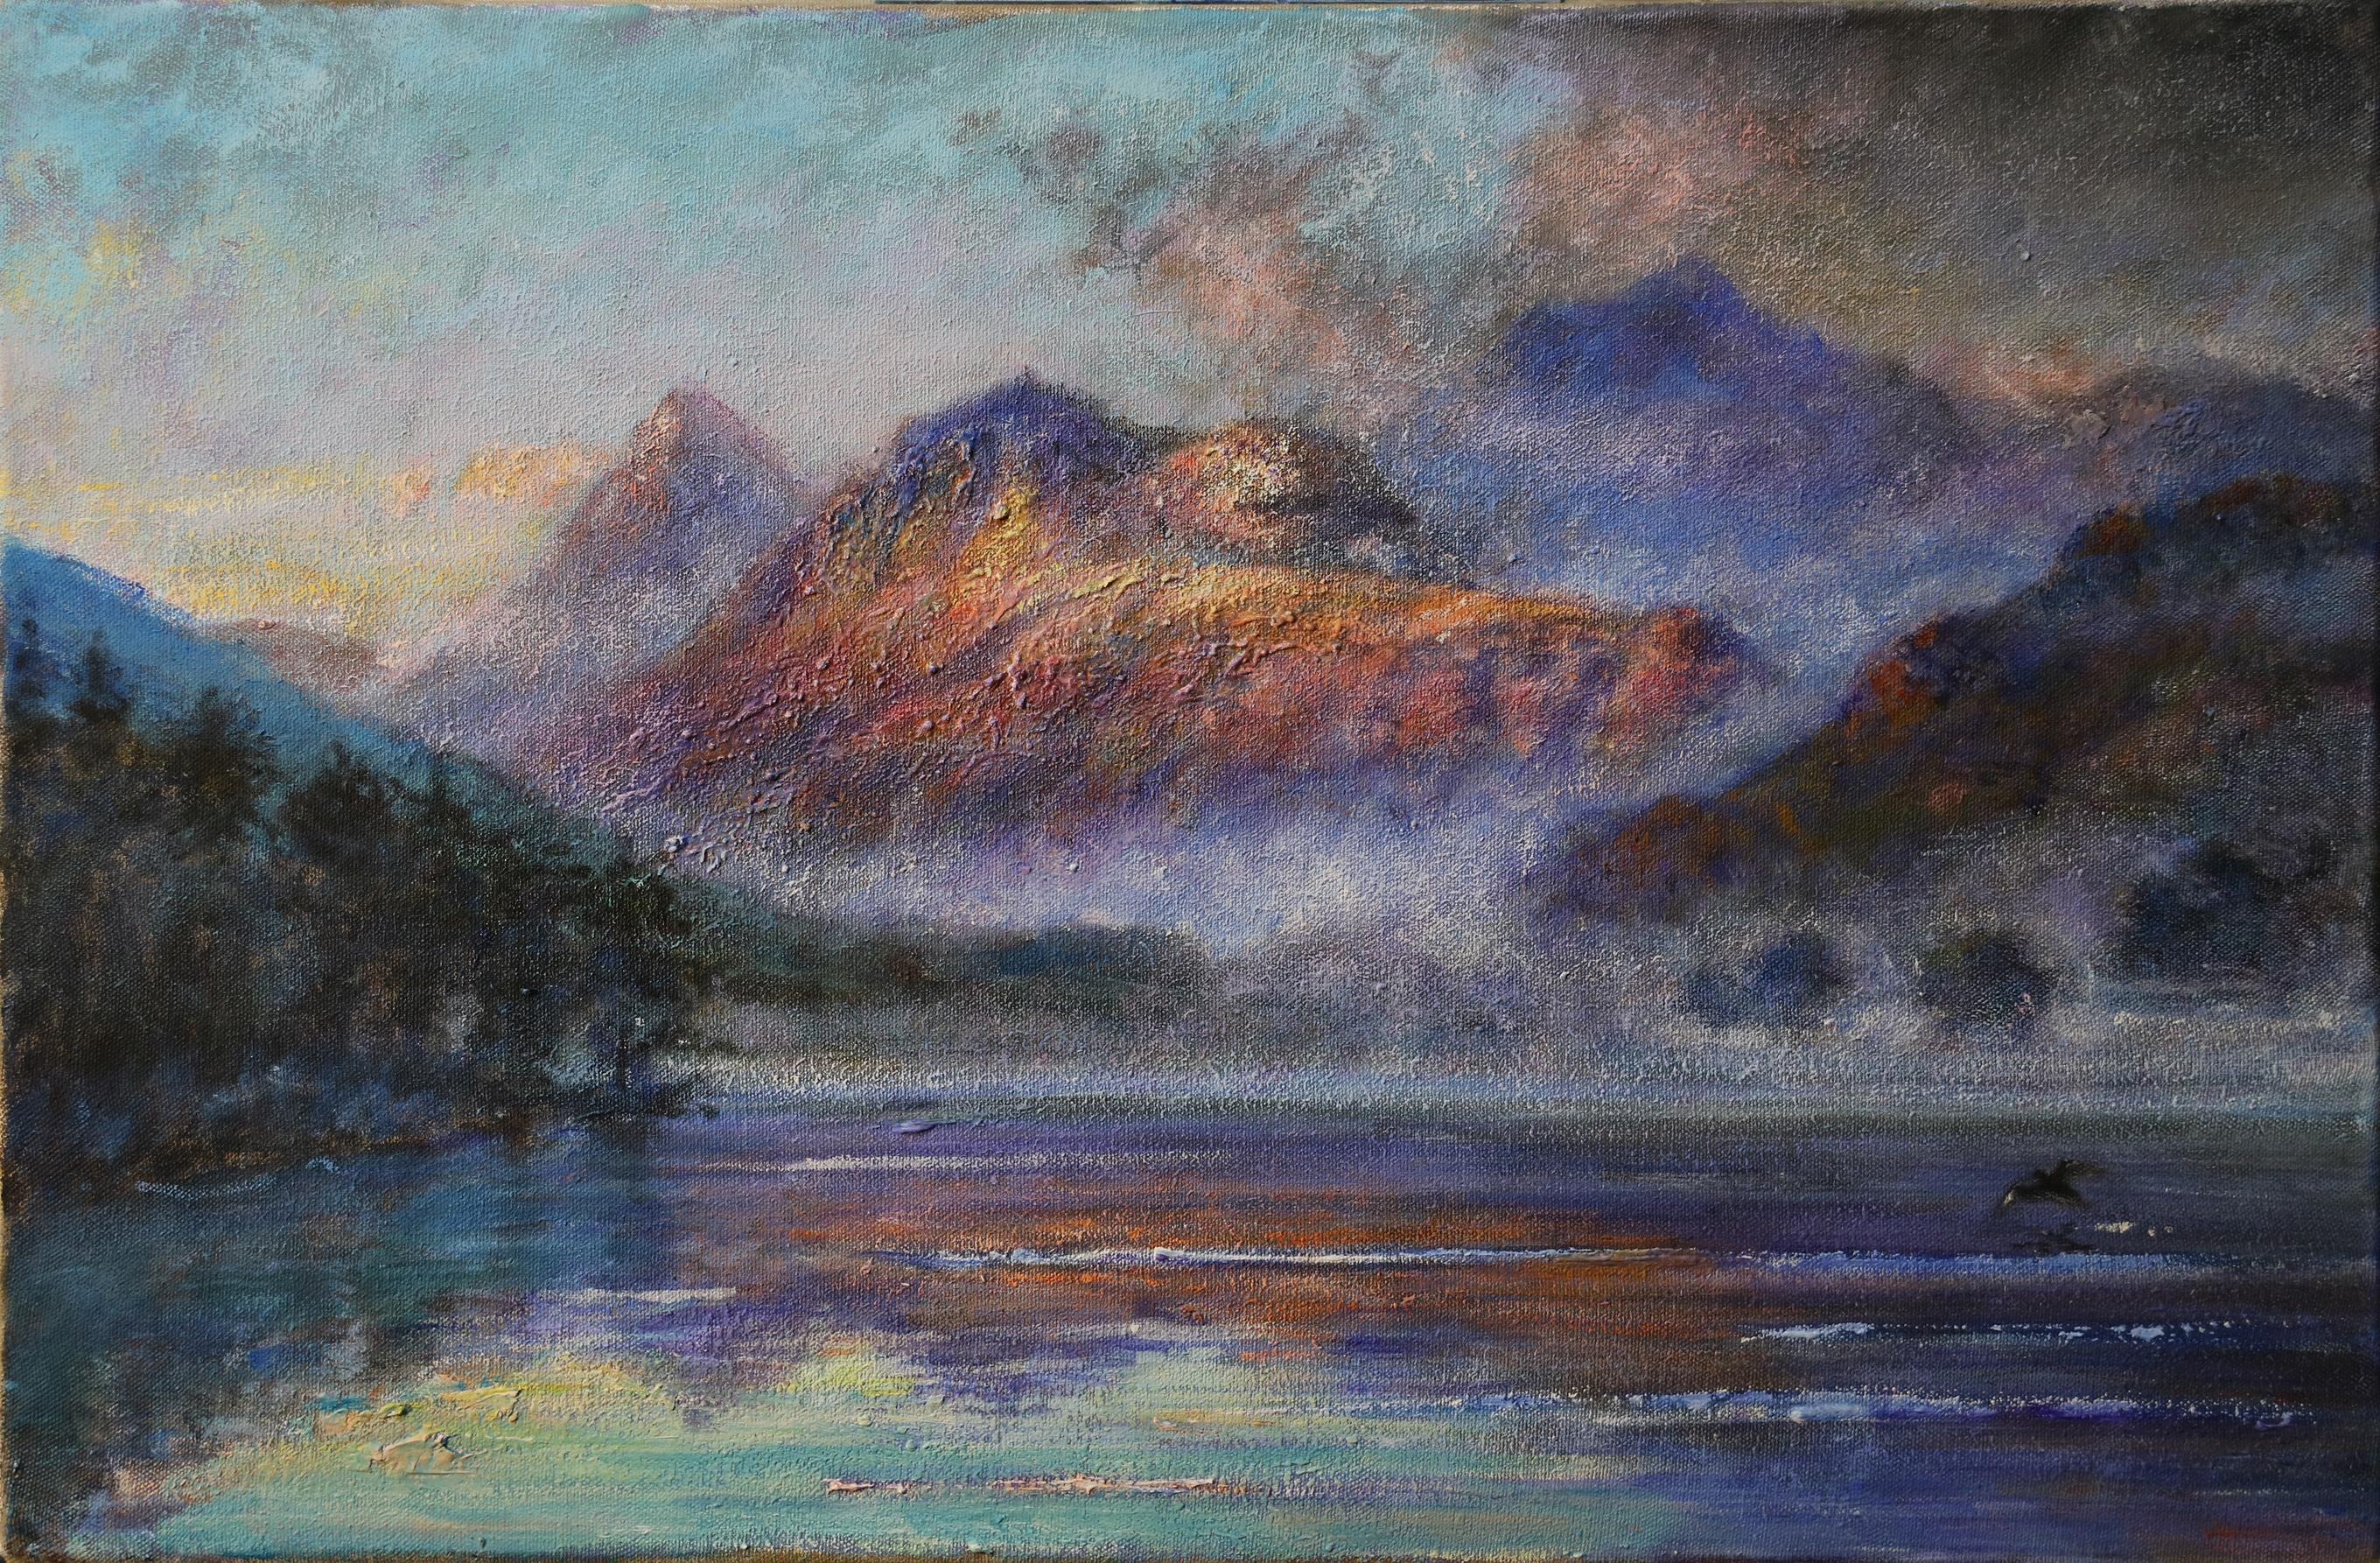 Rene Jerome Legrand Landscape Painting - Langdale Pikes, Lake District England Mountains, mist and Lake scene original oil